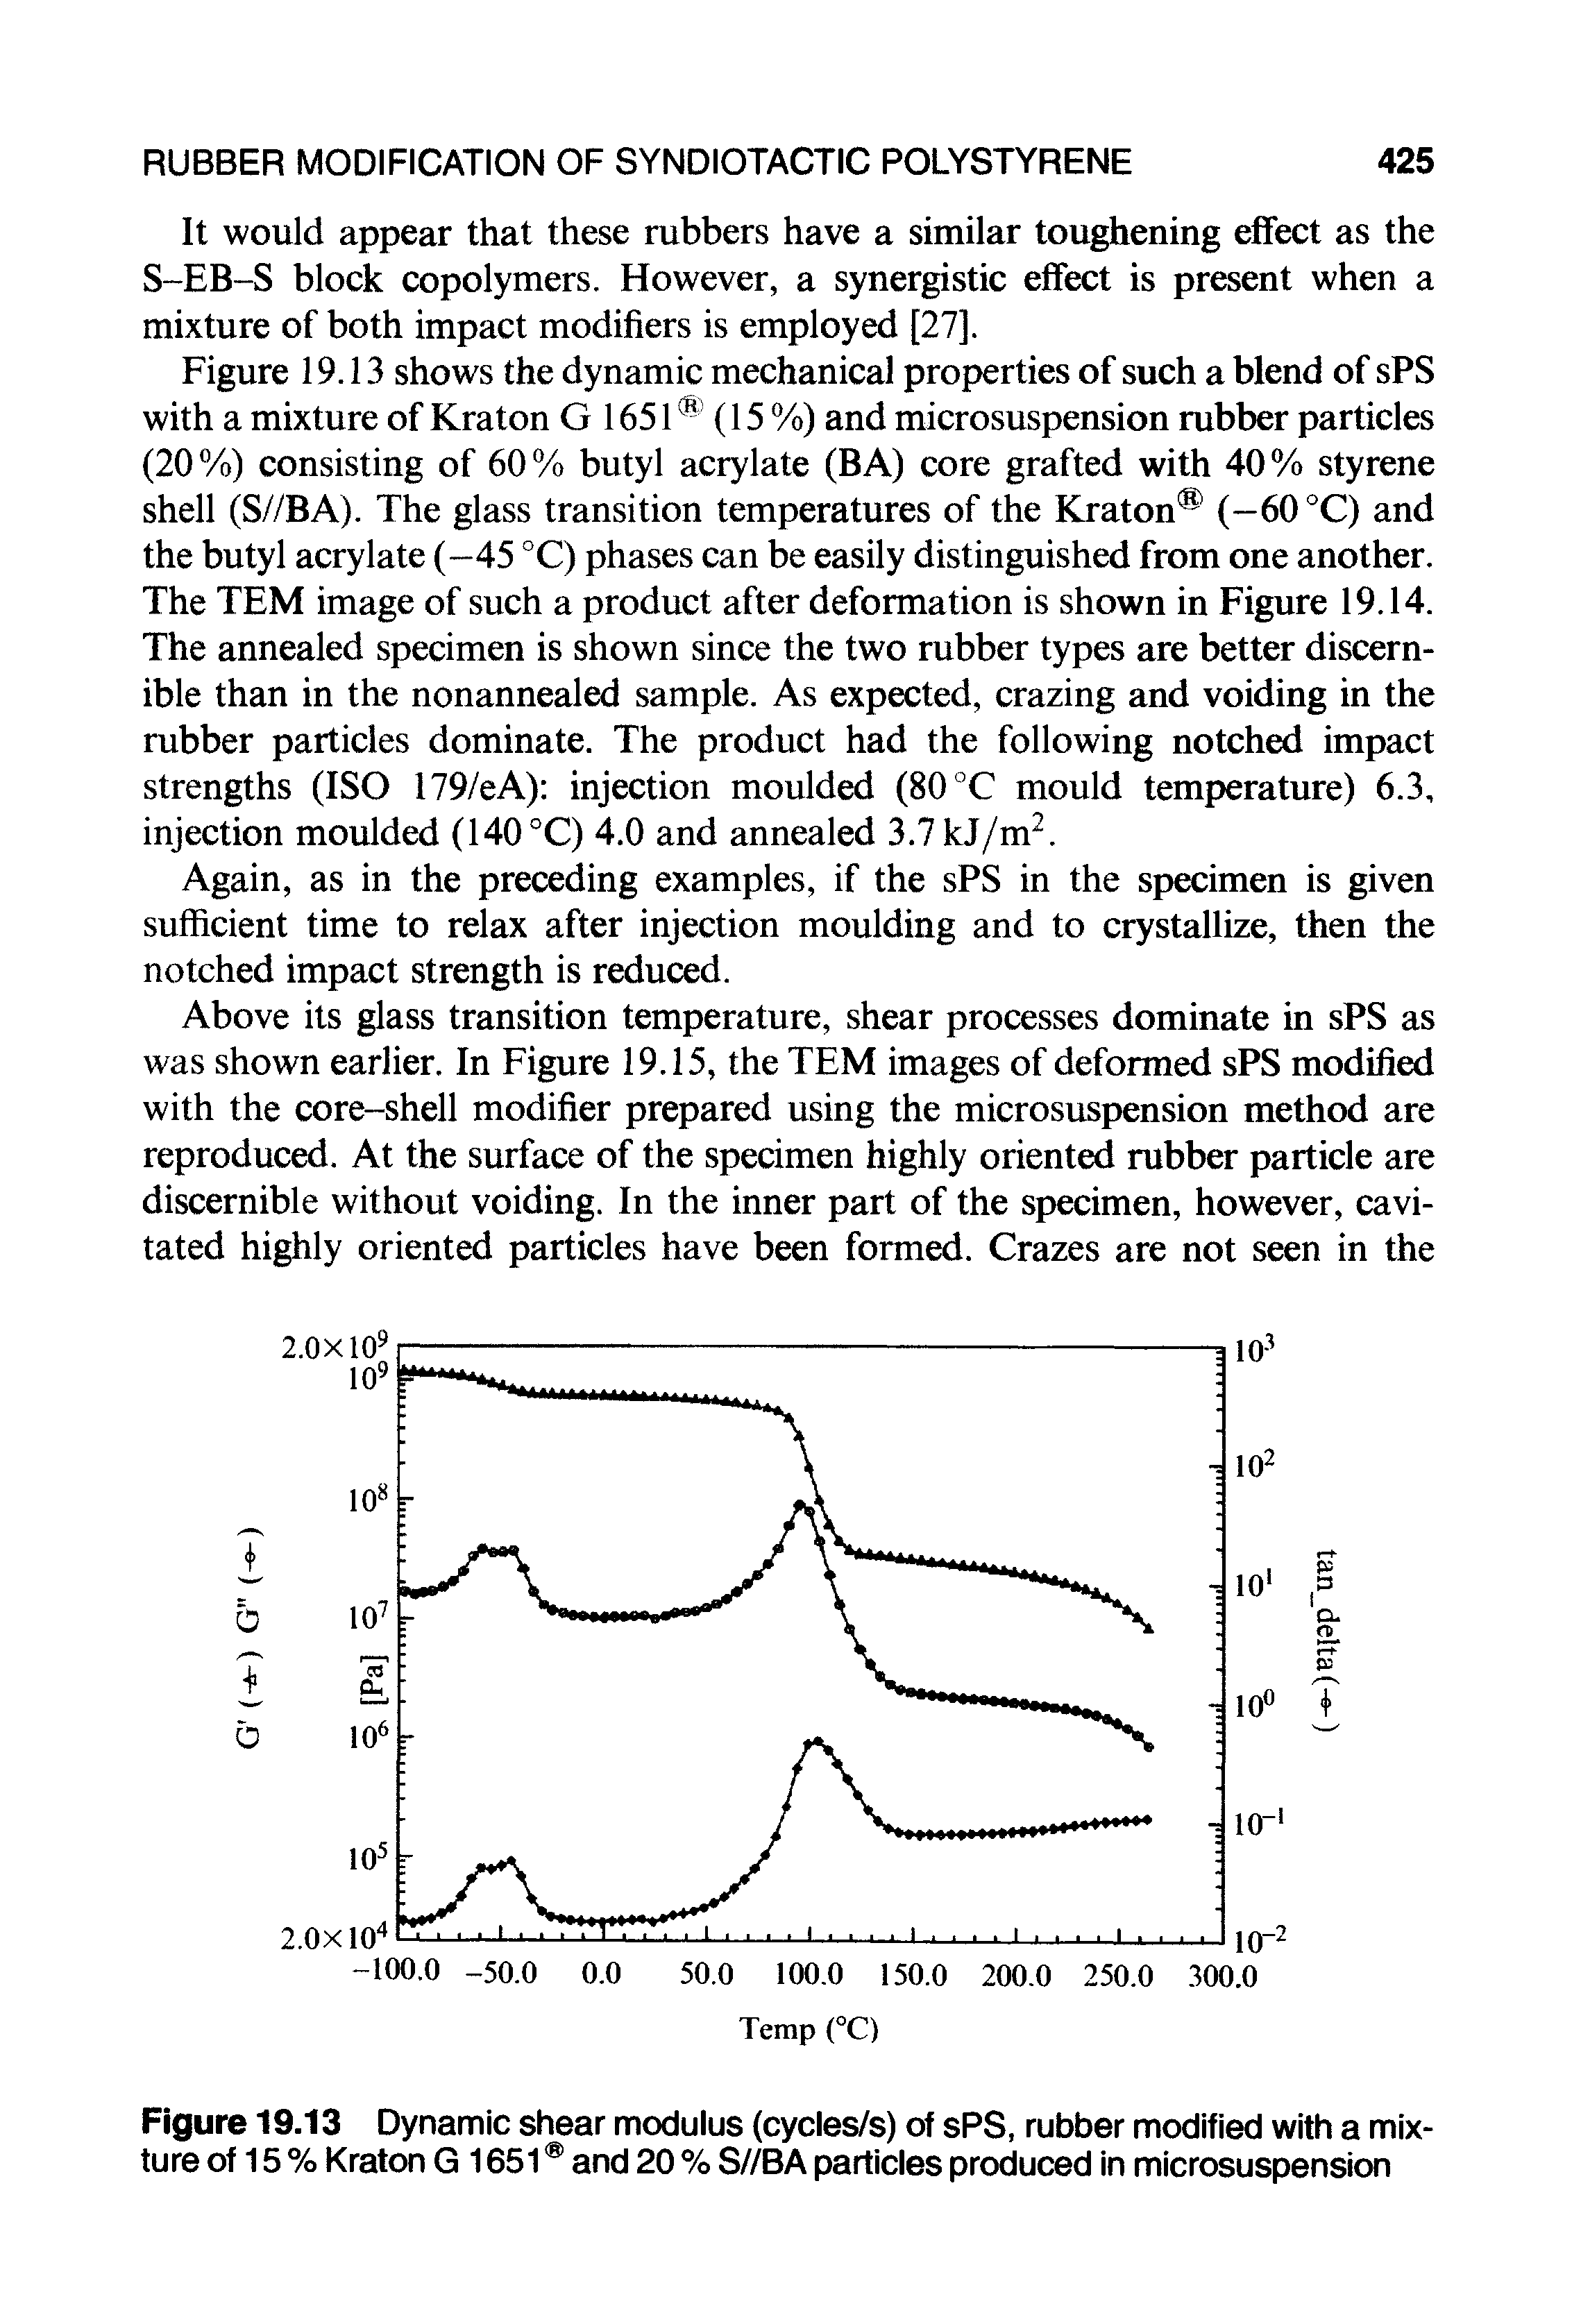 Figure 19.13 Dynamic shear modulus (cycles/s) of sPS, rubber modified with a mixture of 15 % Kraton G 1651 and 20 % S//BA particles produced in microsuspension...